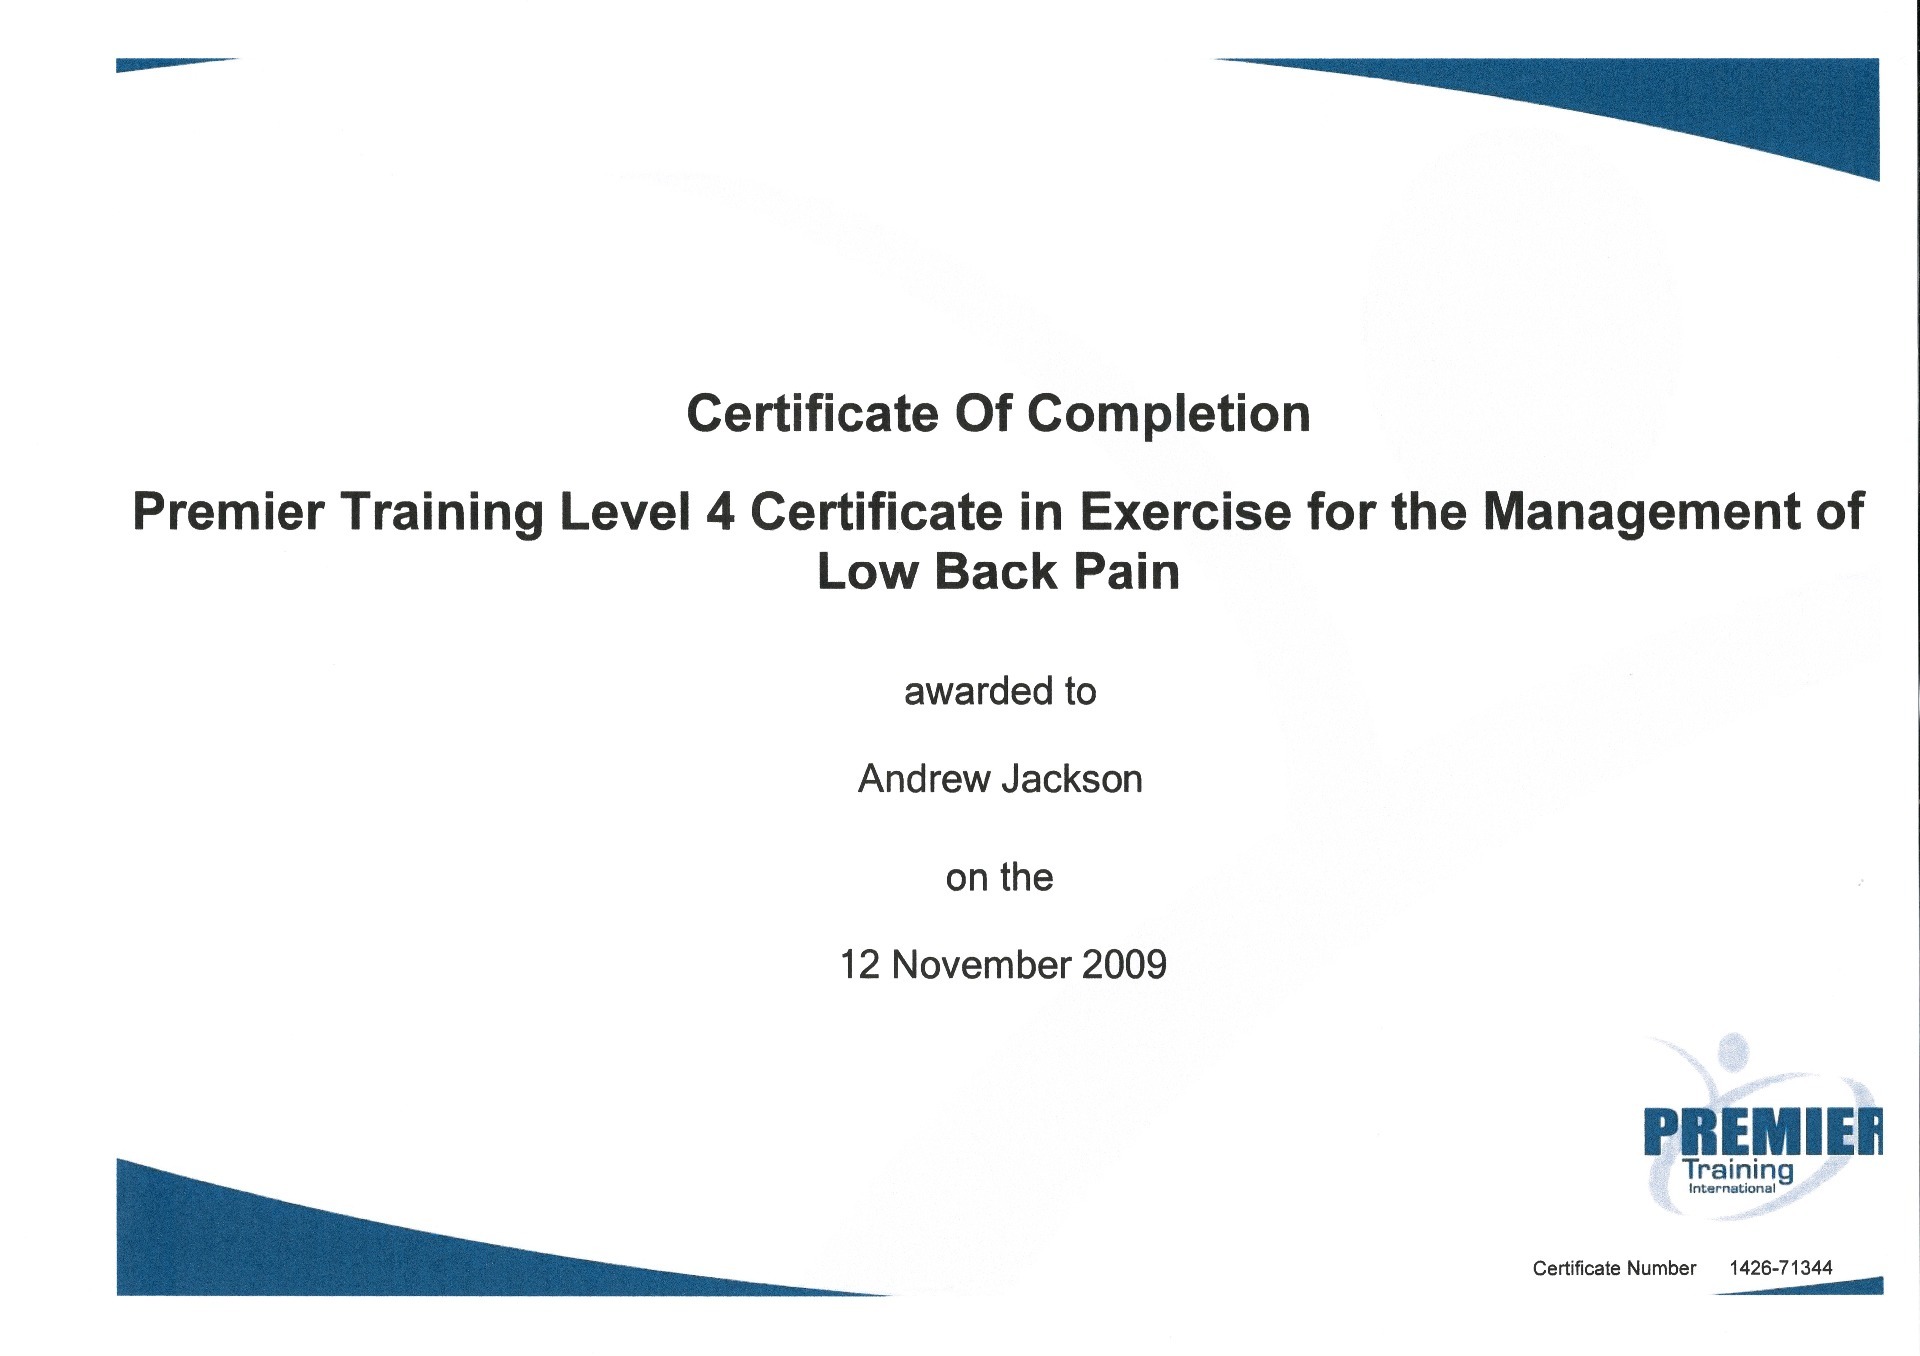 Personal Training Level 4 Certificate in Exercise for the Management of Lower Back Pain